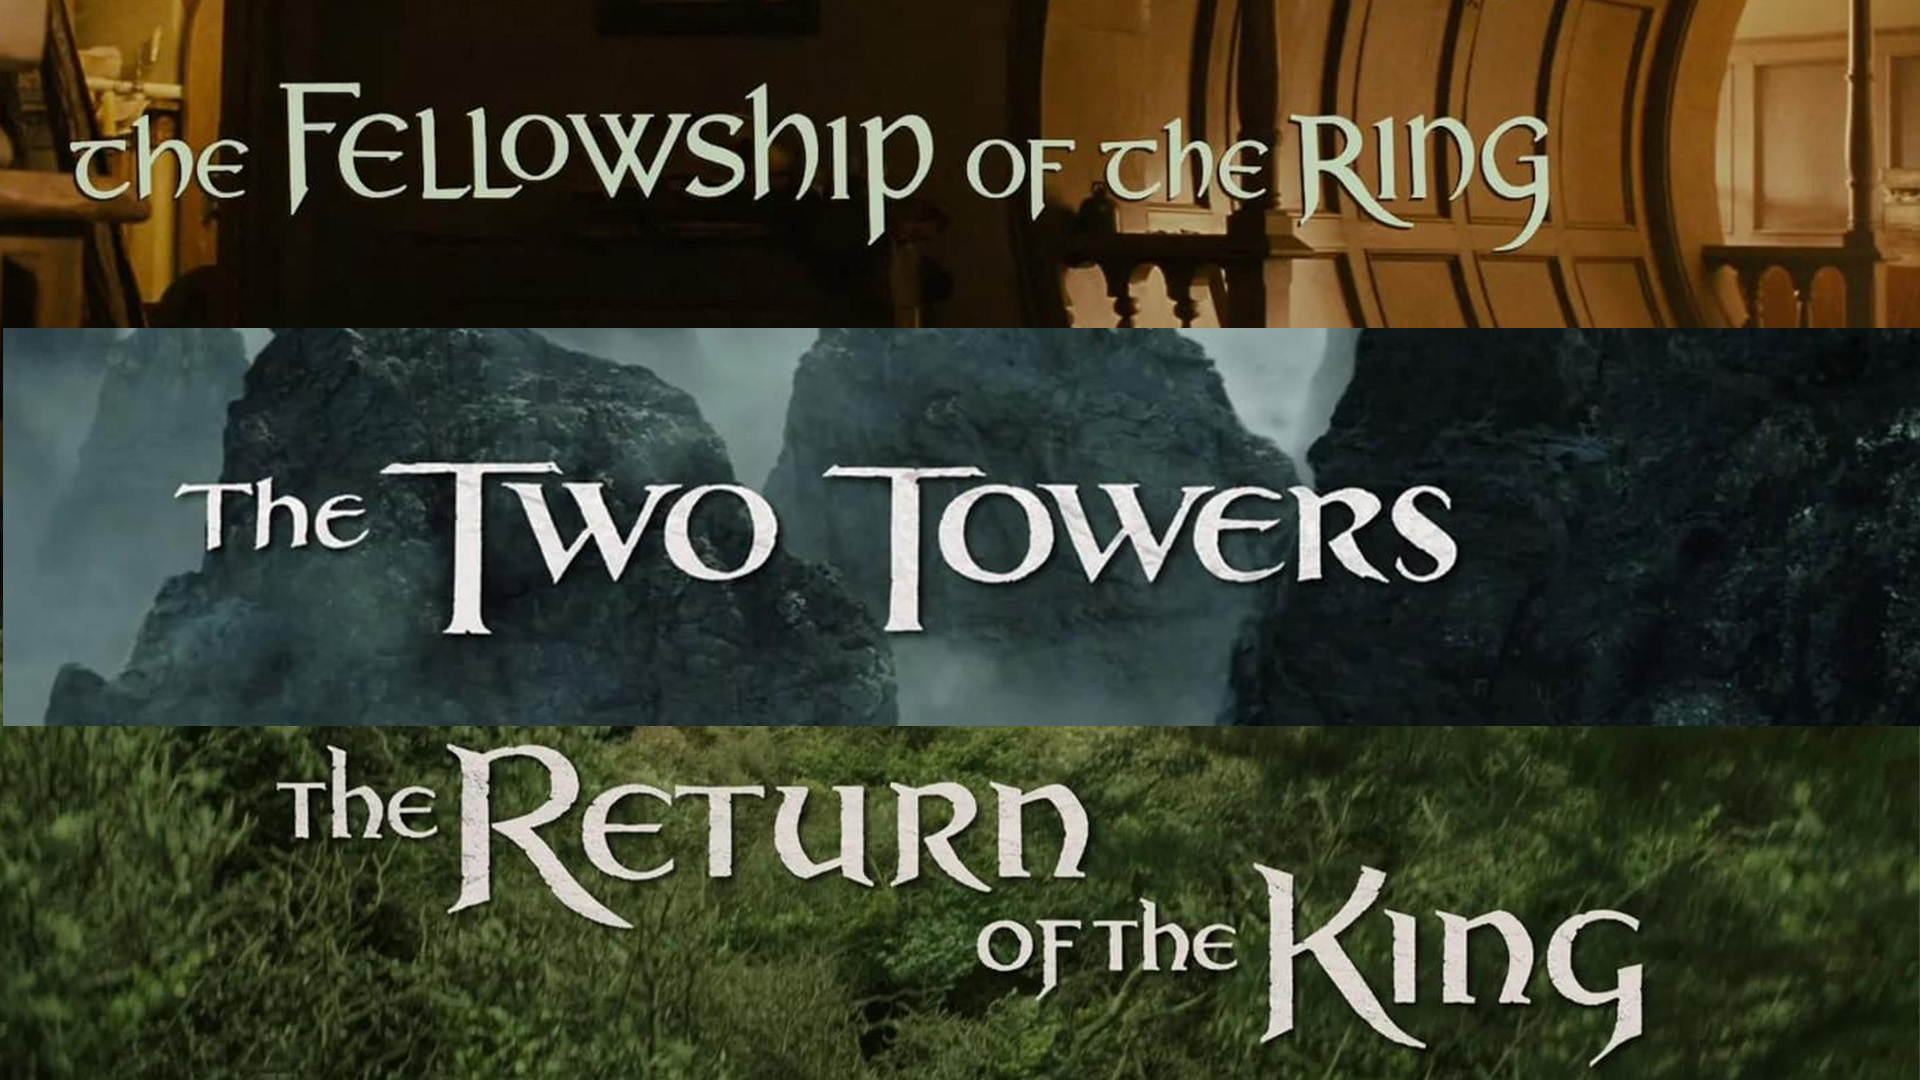 Tales of the Shire, Embracer, Rings of Power și LOTR revin în cinematografe